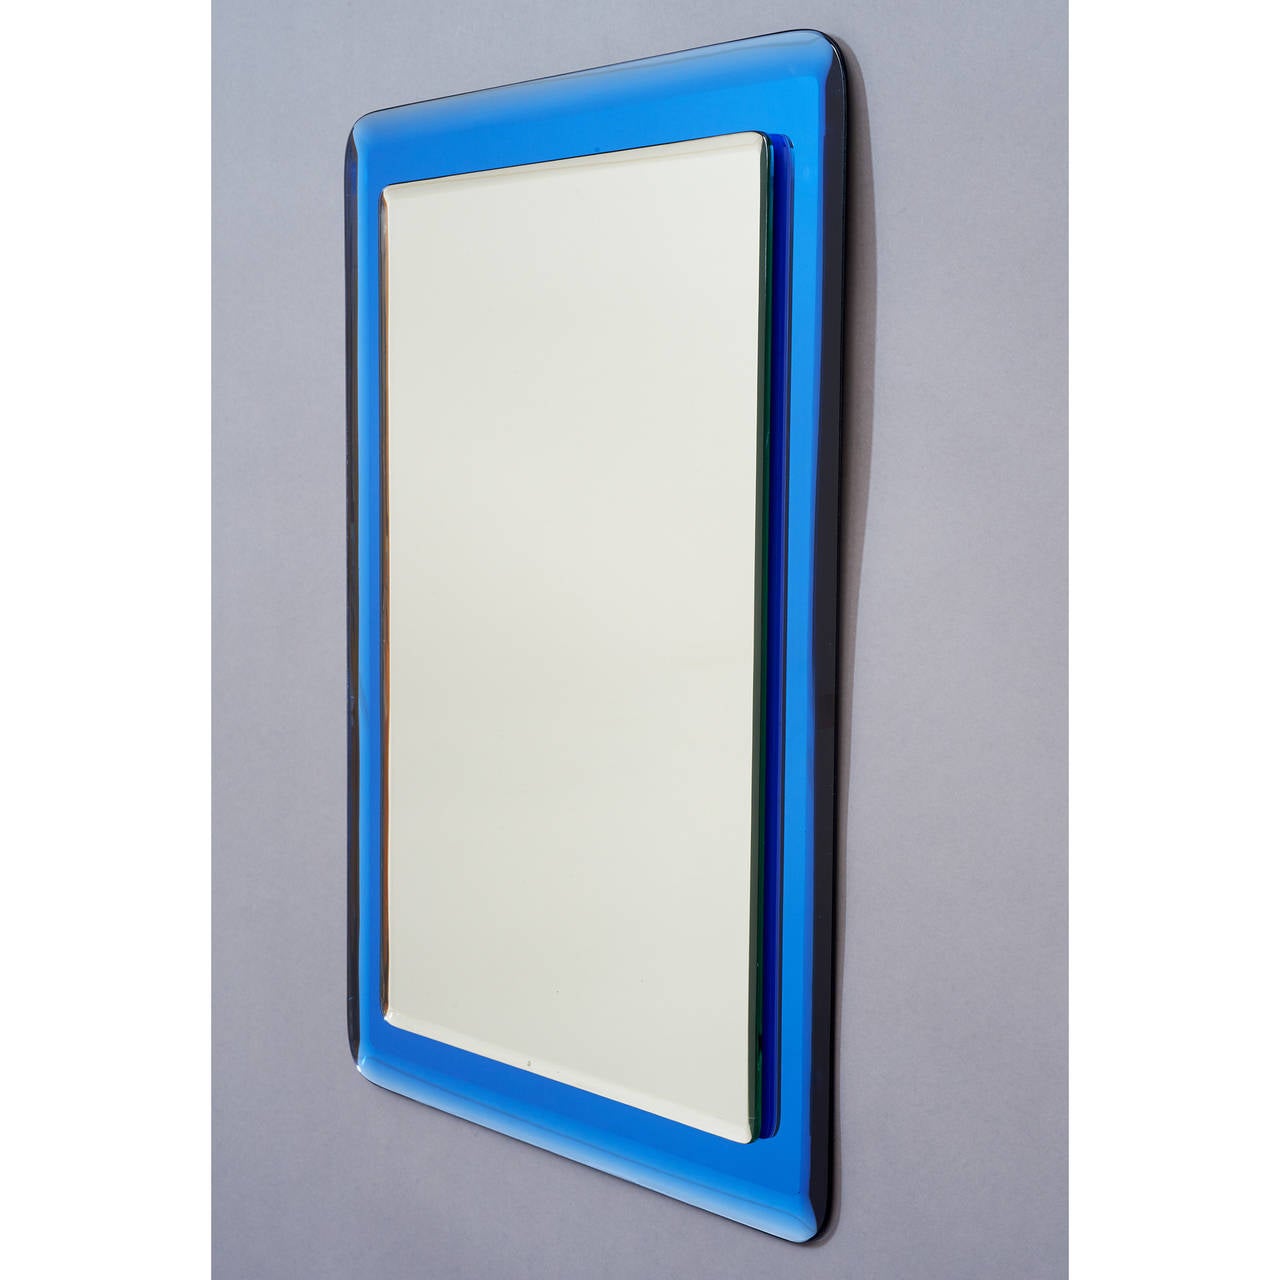 Italy, 1970s.
Elegant reverse beveled mirror mounted on reverse beveled blue mirrored glass, with rounded corners.
20 W x 28 H 


